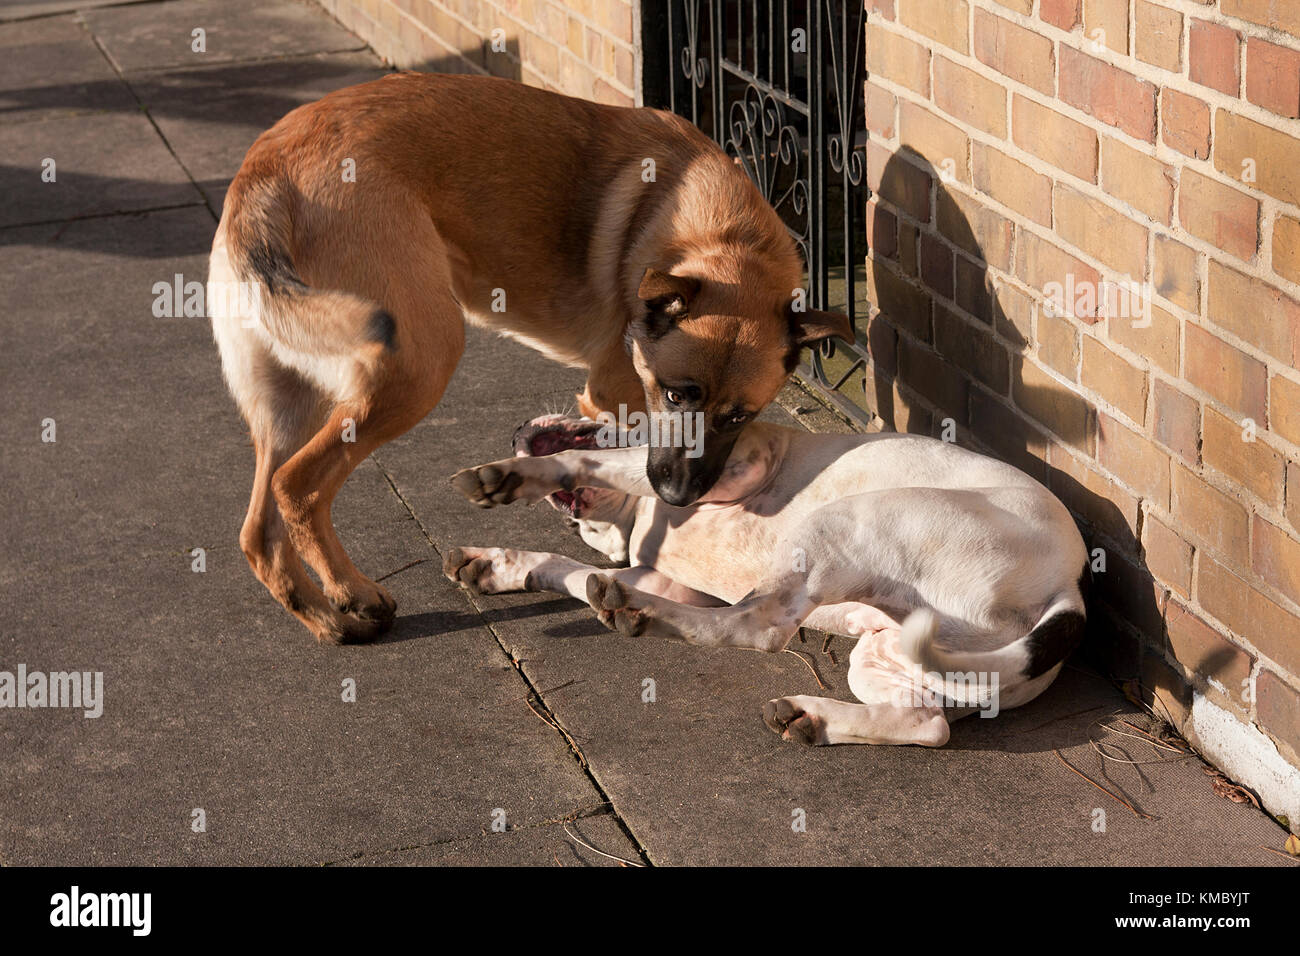 two dogs fighting in city street Stock Photo